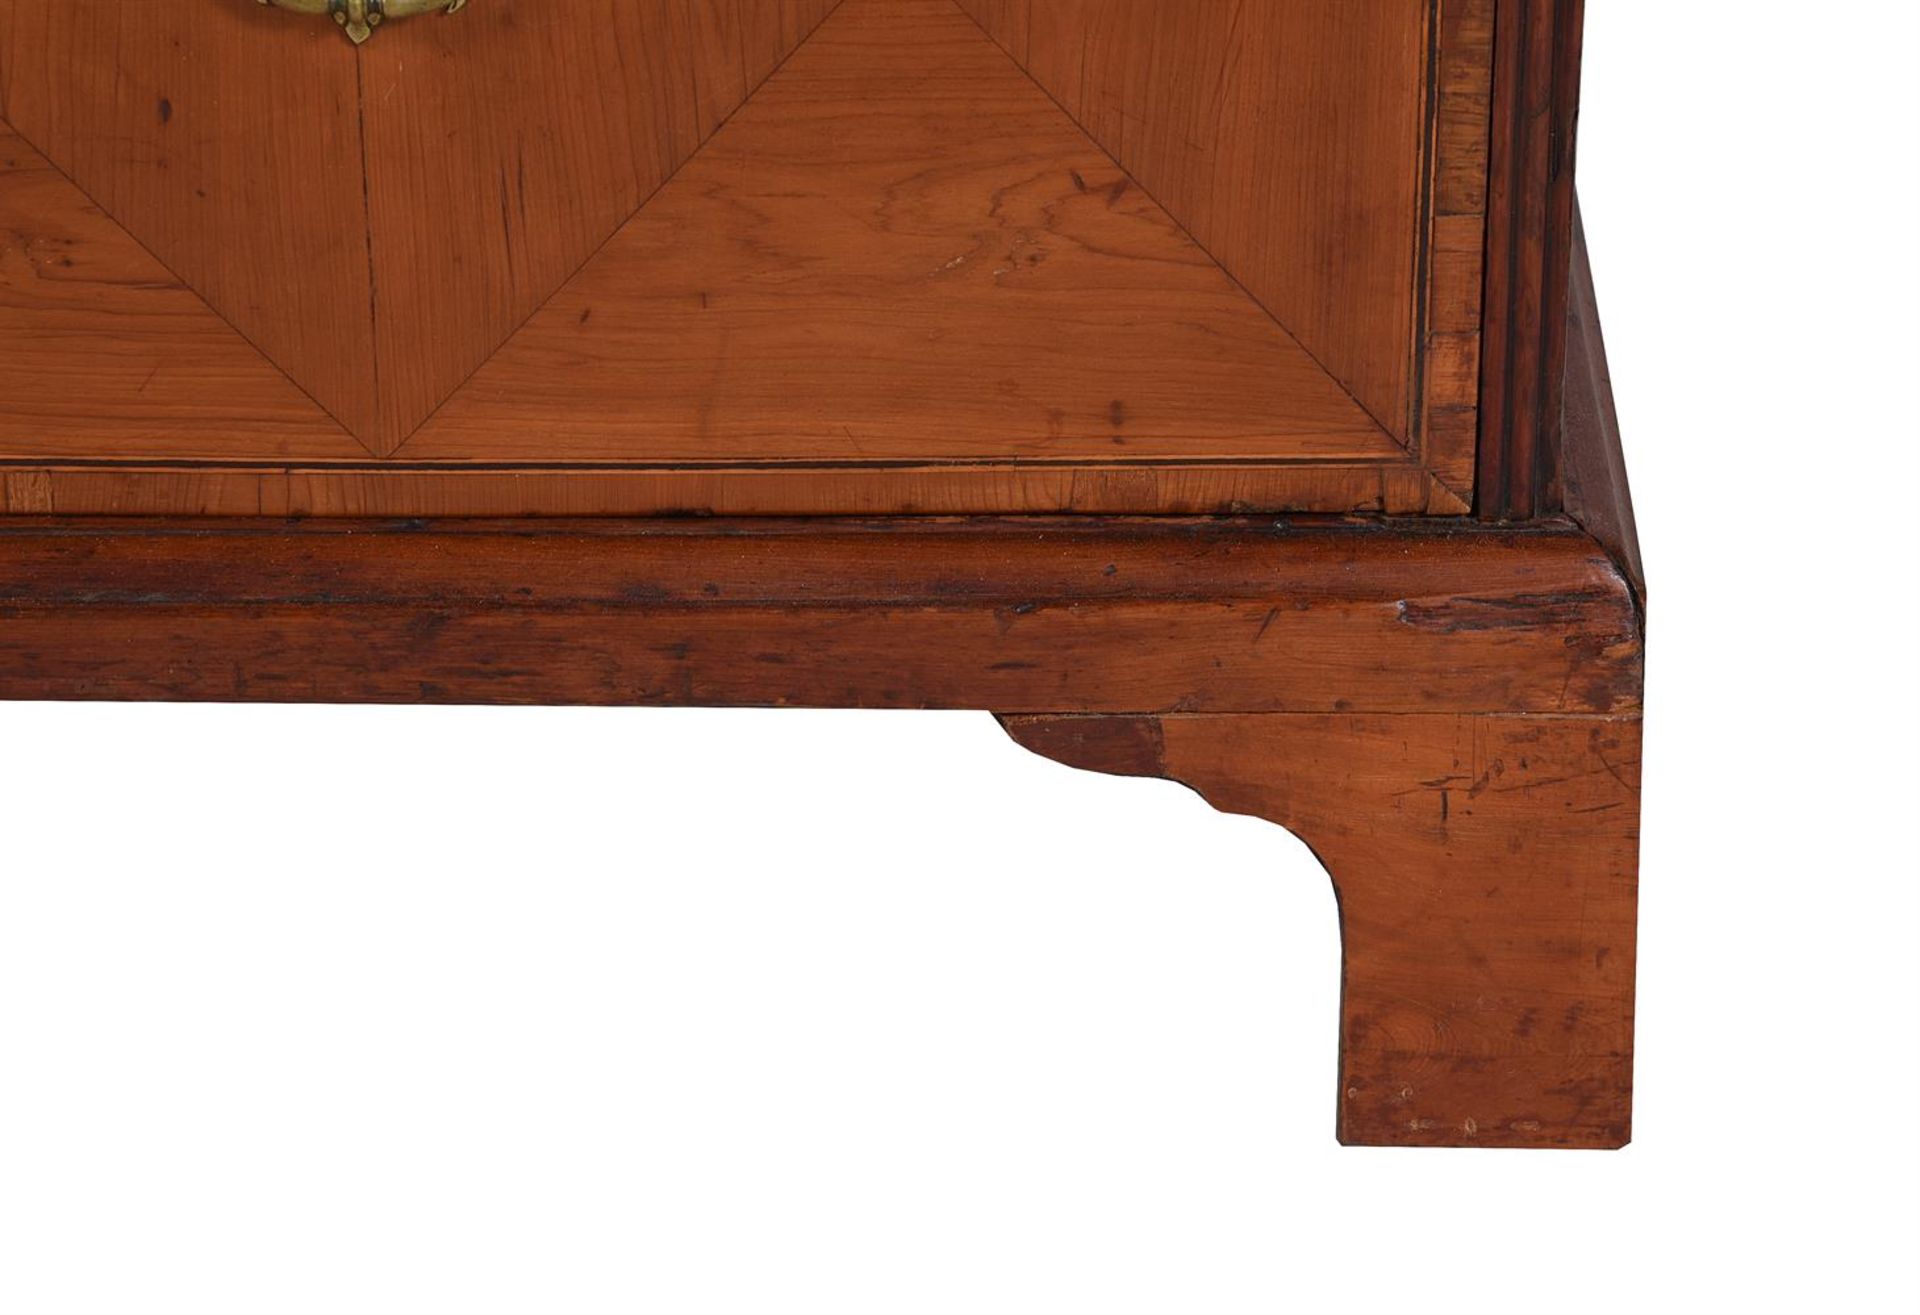 AN UNUSUAL YEW WOOD CABINET ON CHEST, 18TH CENTURY - Image 4 of 7